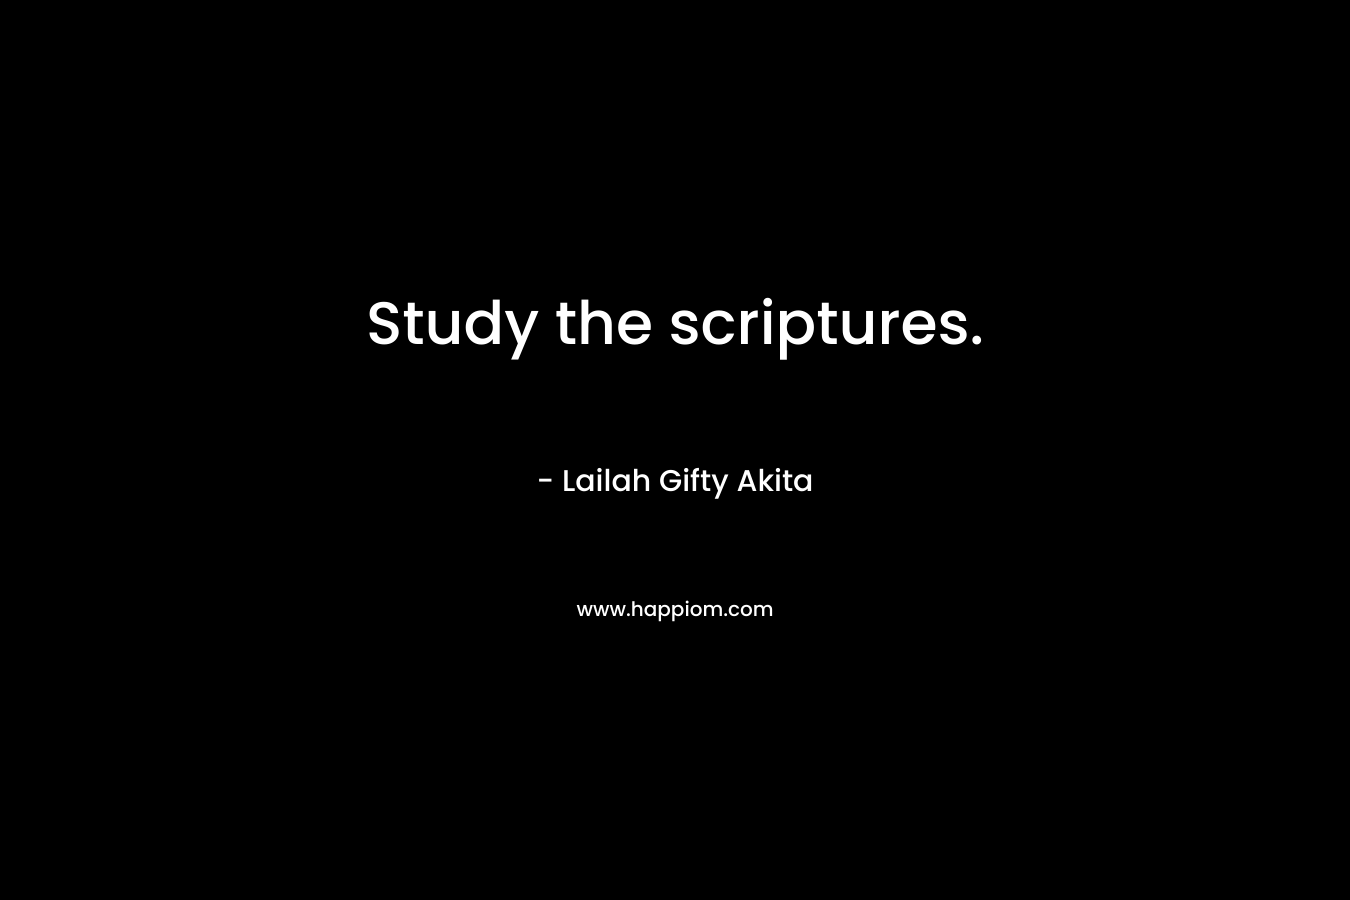 Study the scriptures.